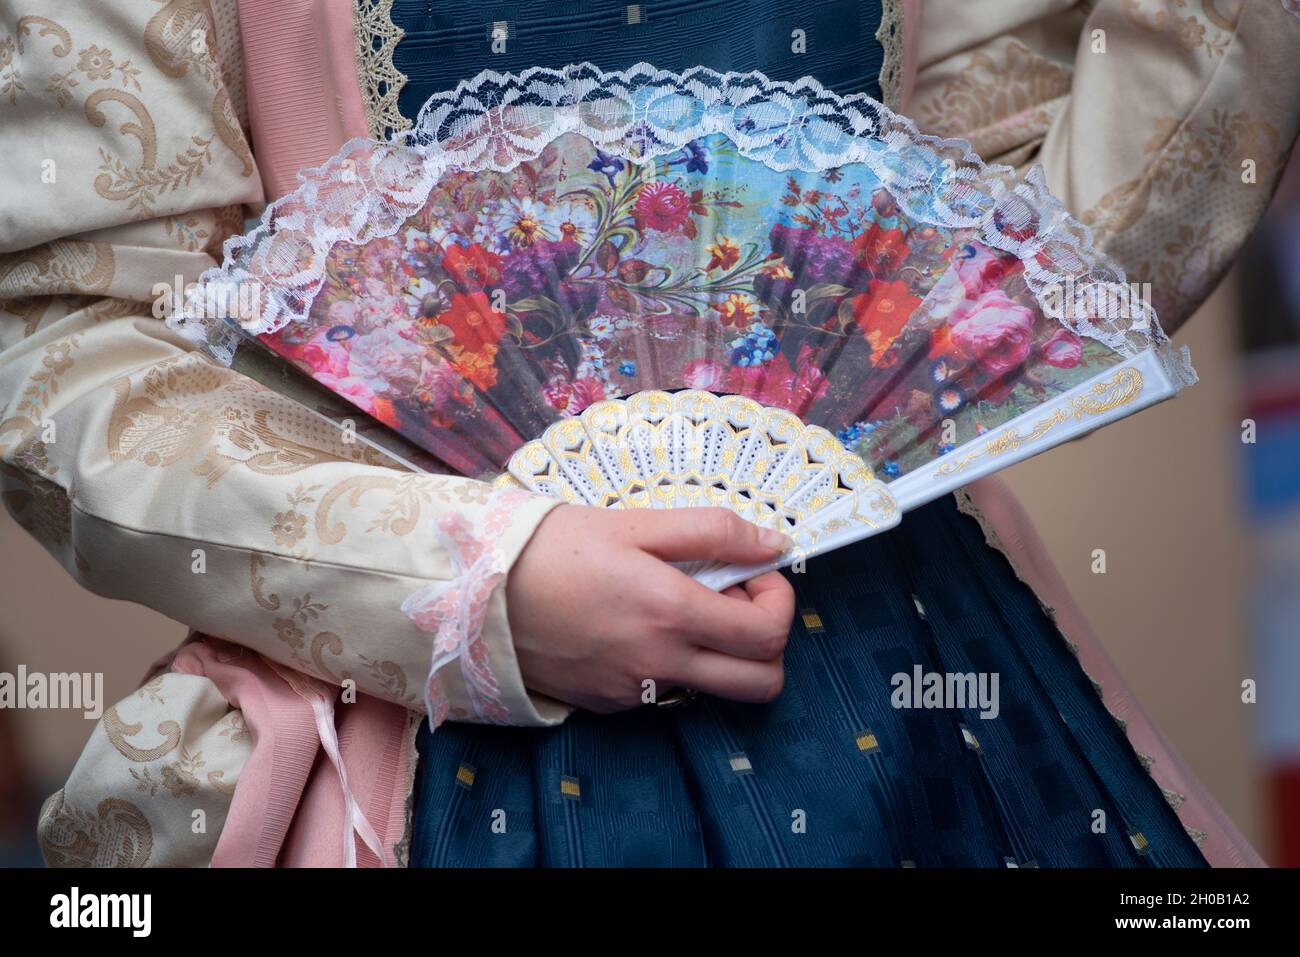 Italy, Lombardy, Historical Recalling, Woman Holding Folding Fans Stock Photo